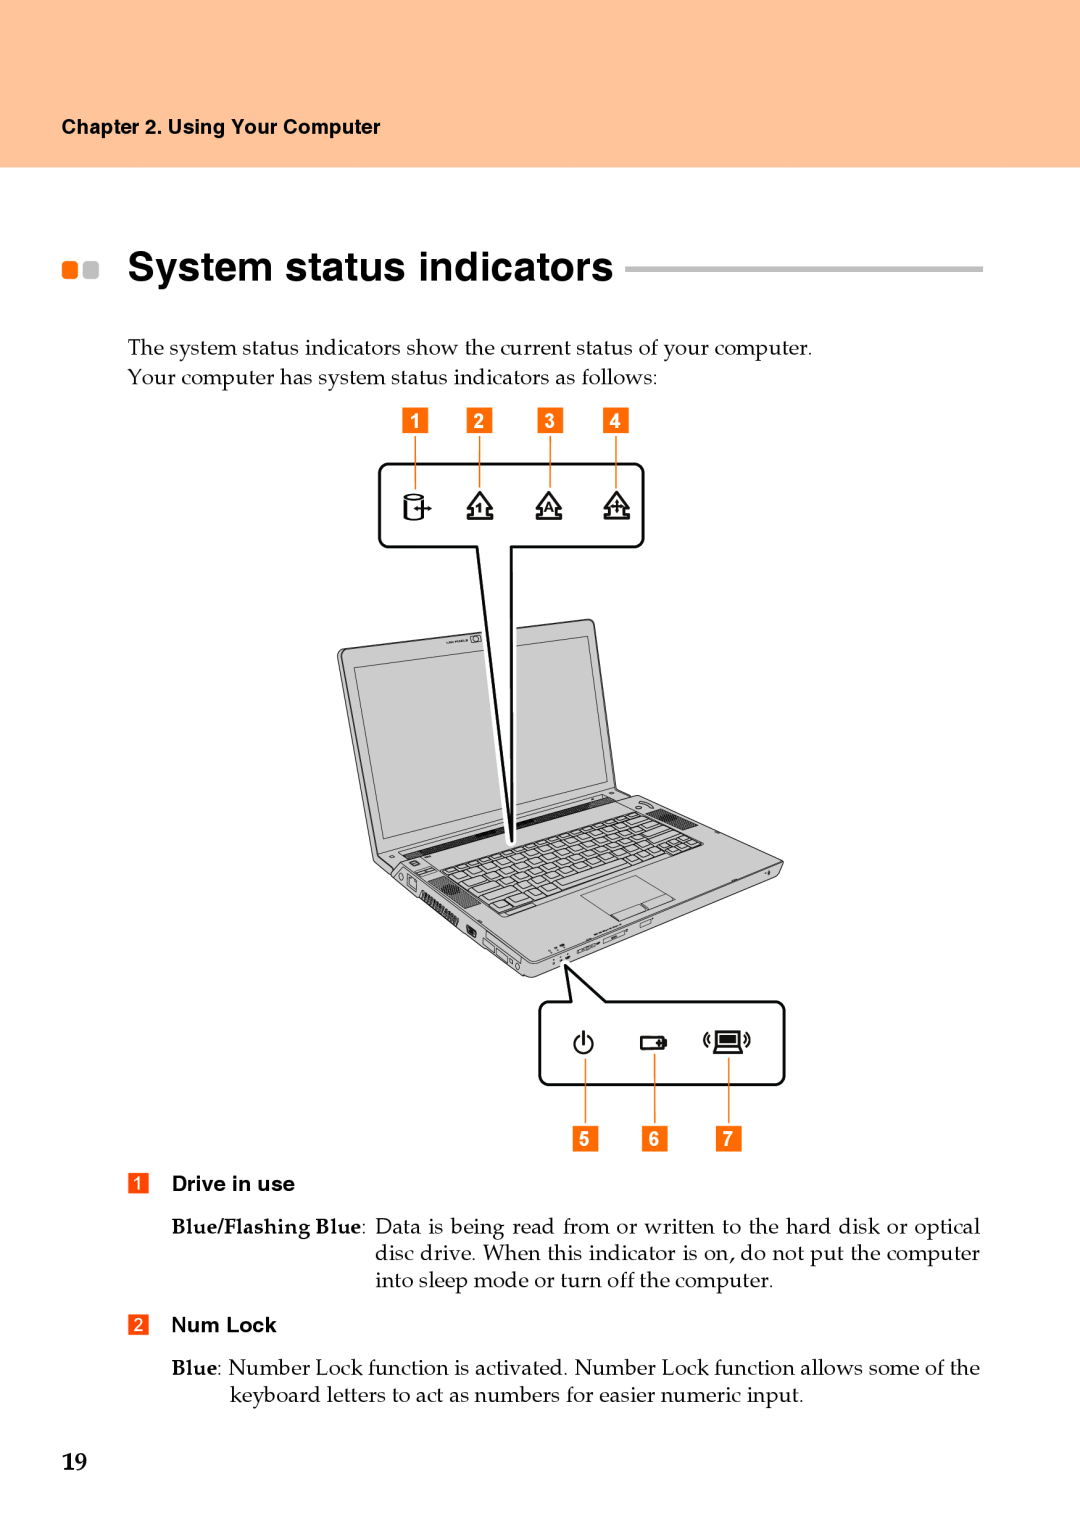 Lenovo Y510 warranty System status indicators, Using Your Computer, 1 2 3 5 6, a Drive in use, b Num Lock 